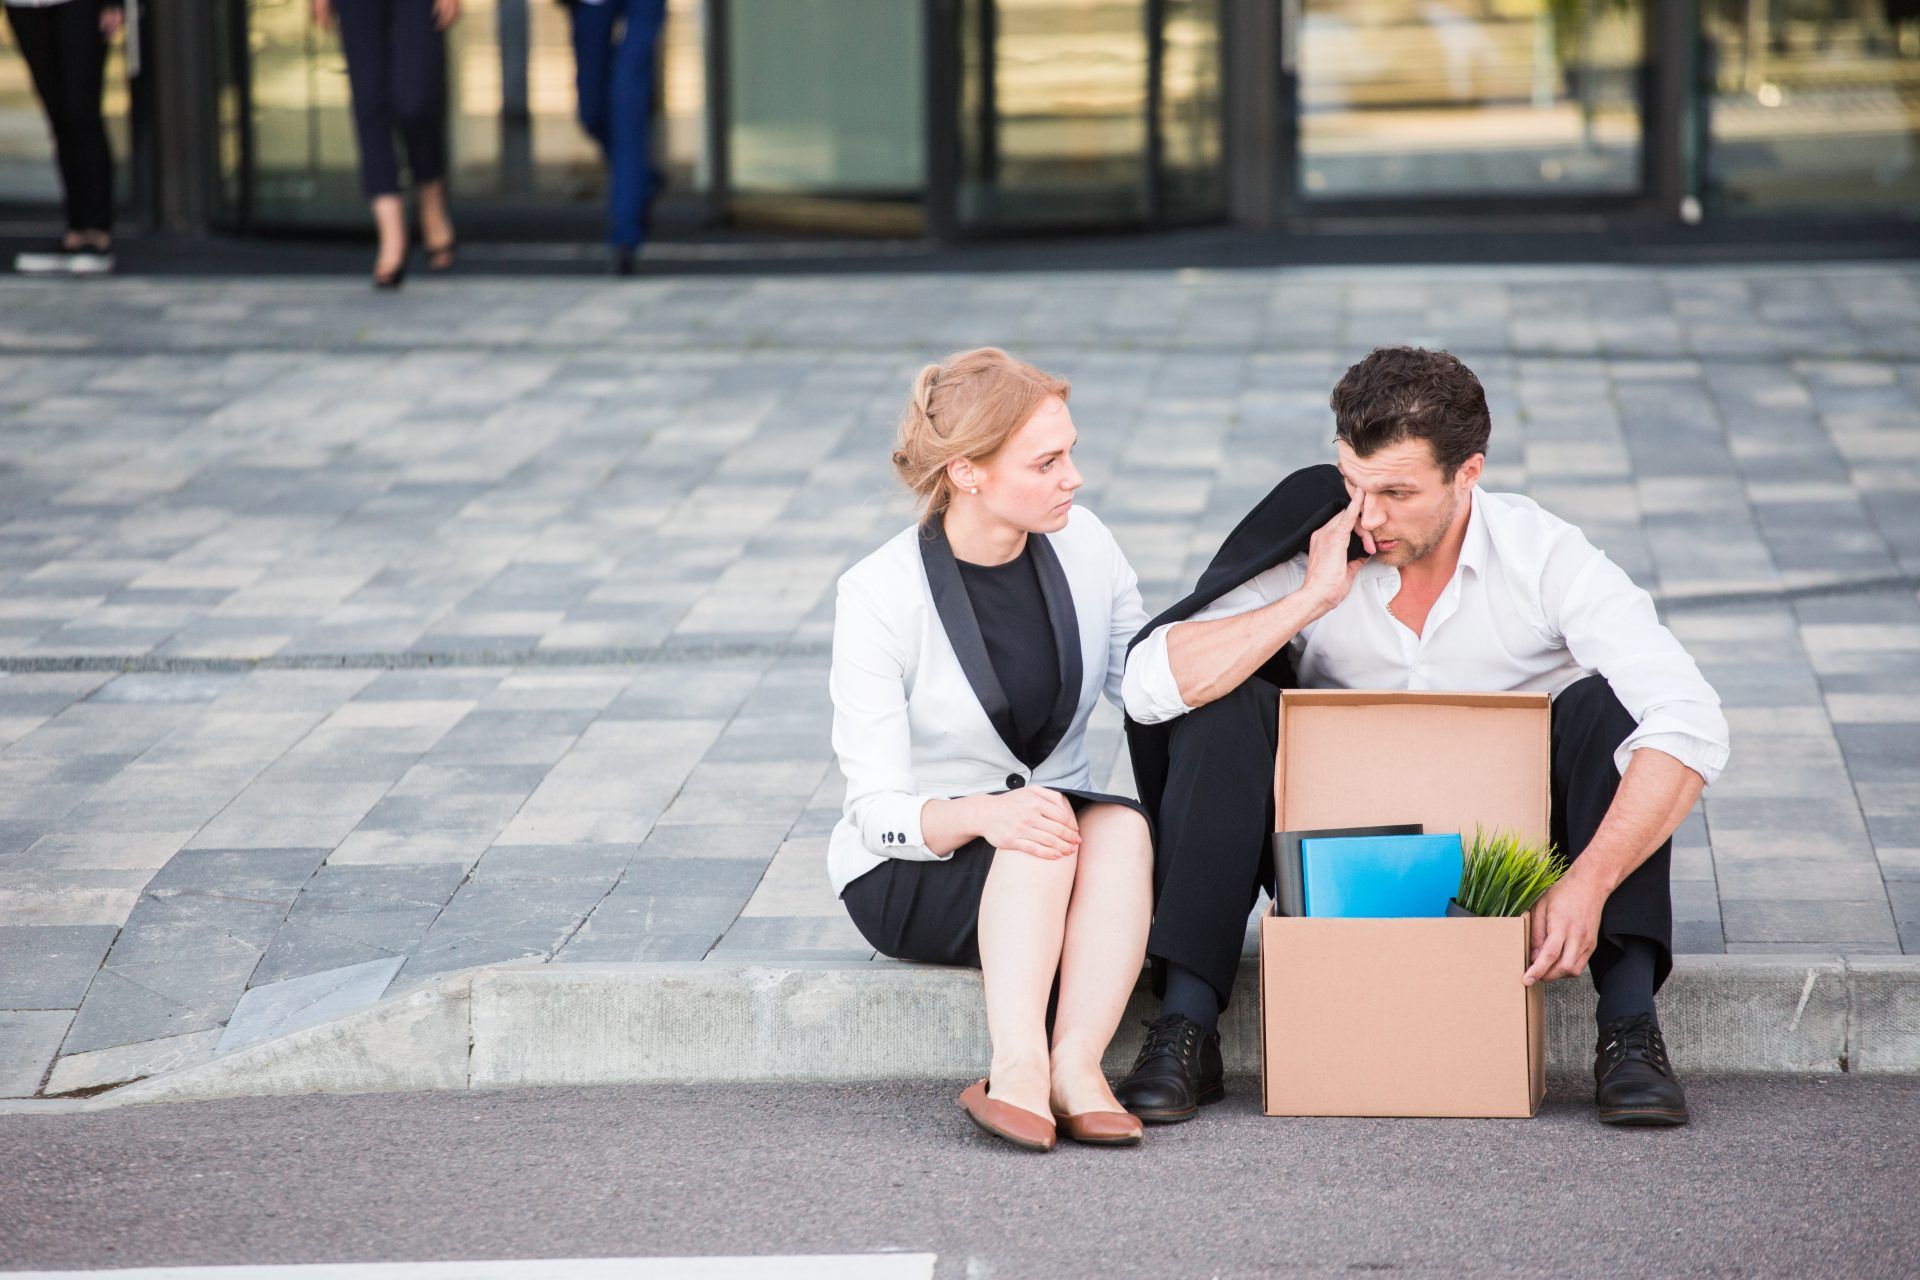 Woman comforts man sitting on curb with box of office items - redundancies